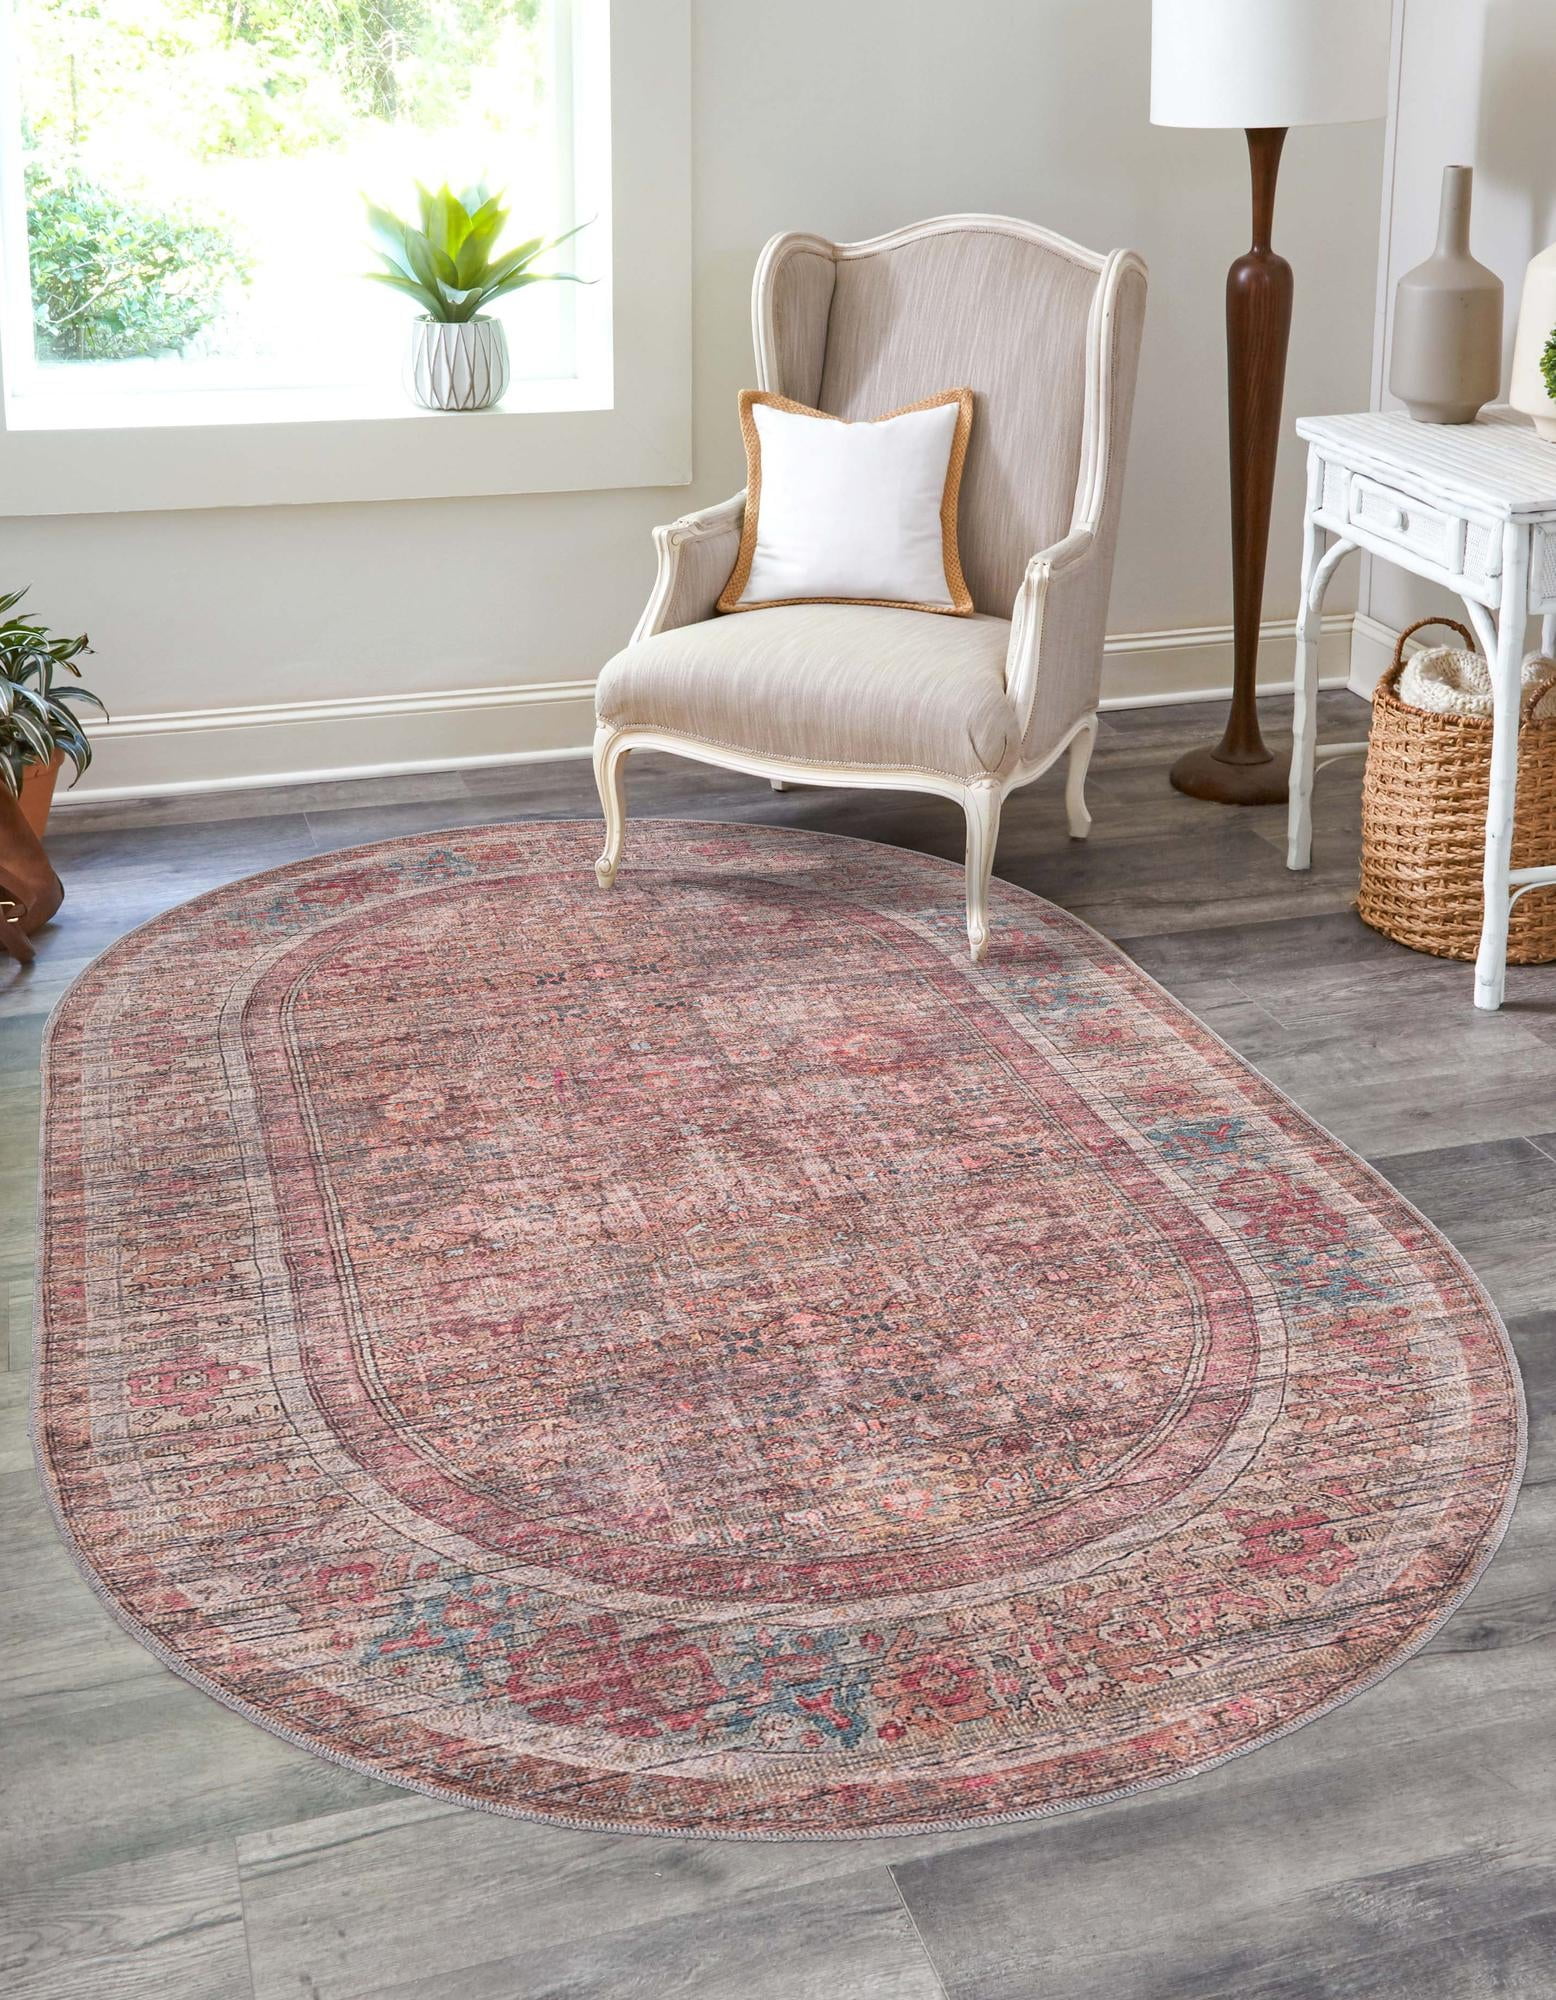 Unique Loom Euphoria Nostalgia Rug Rust Red and Brown/Beige 5' 3 x 8' Oval  Machine Washable Textured Border Modern Flatweave Perfect For Dining Room